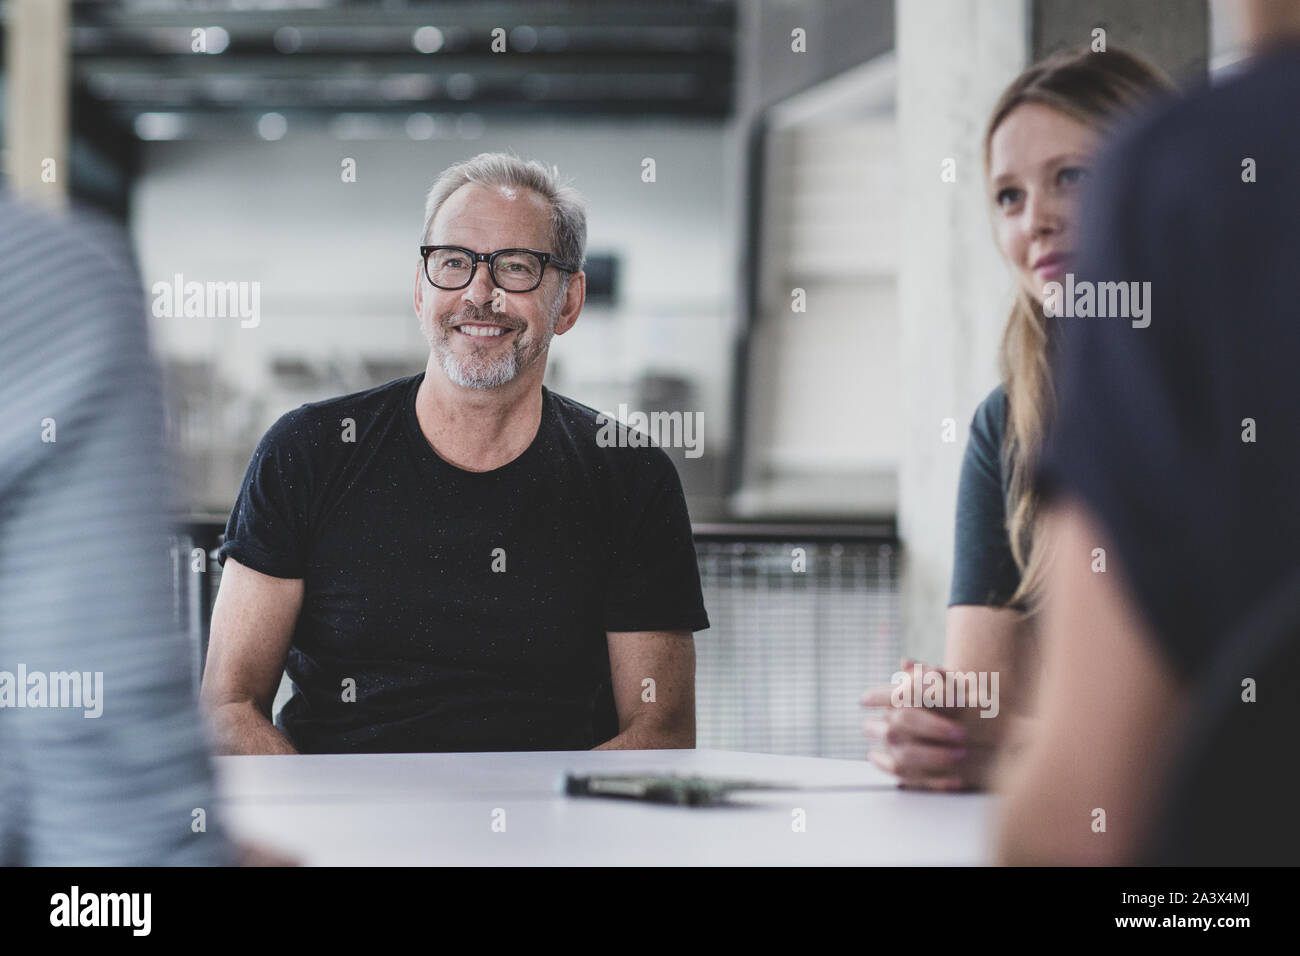 Mature adult male leading a meeting at a tech company Stock Photo